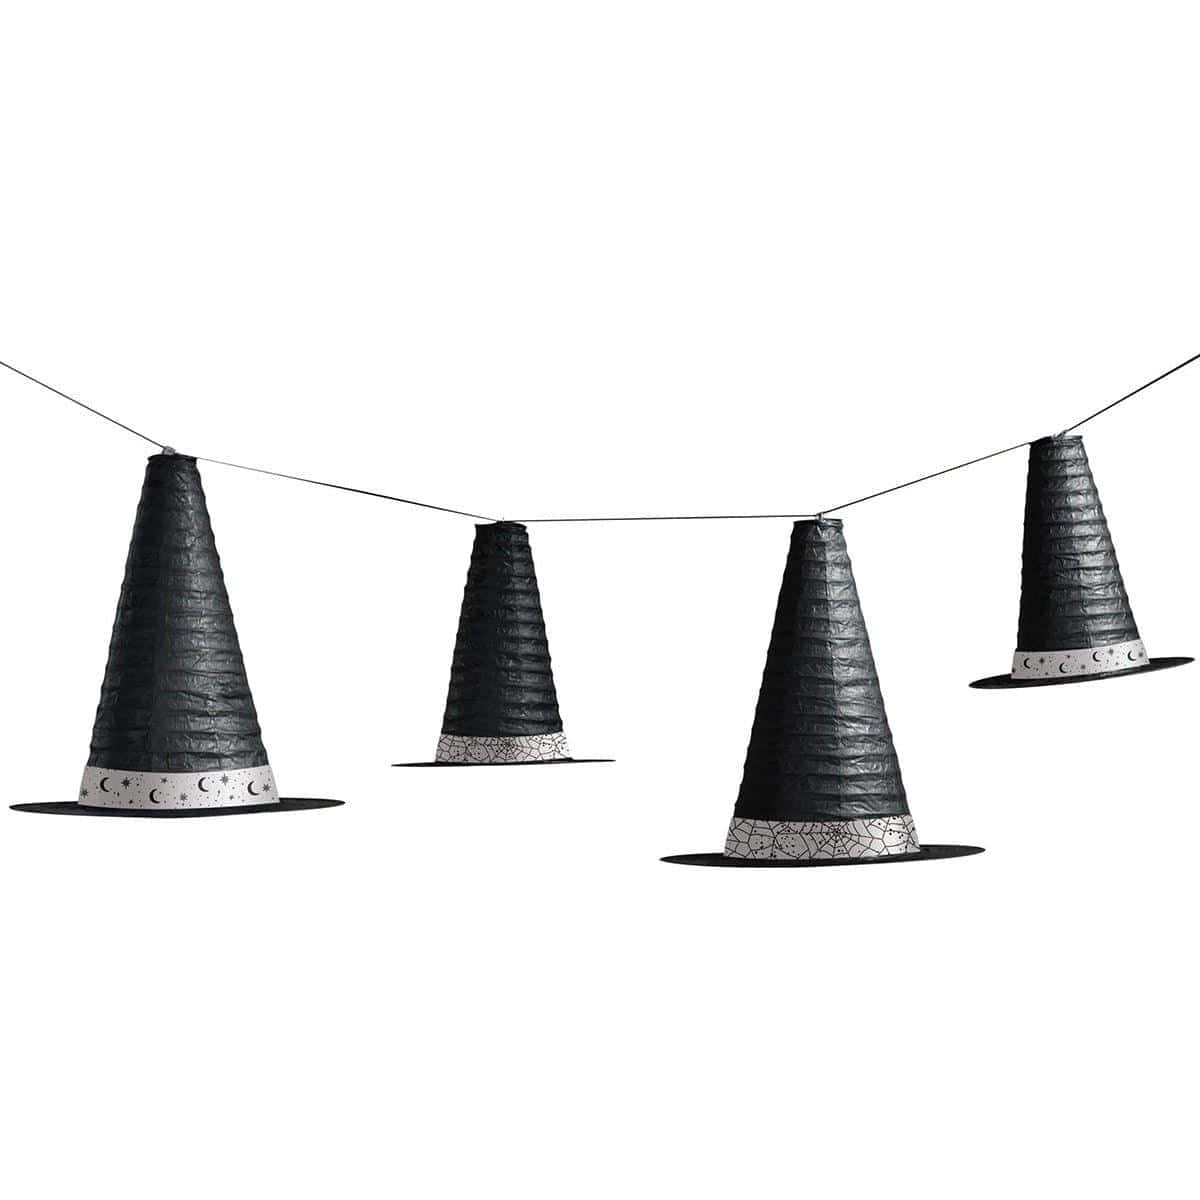 Buy Halloween Classic Black&White Witches Hats Hanging Lanterns sold at Party Expert